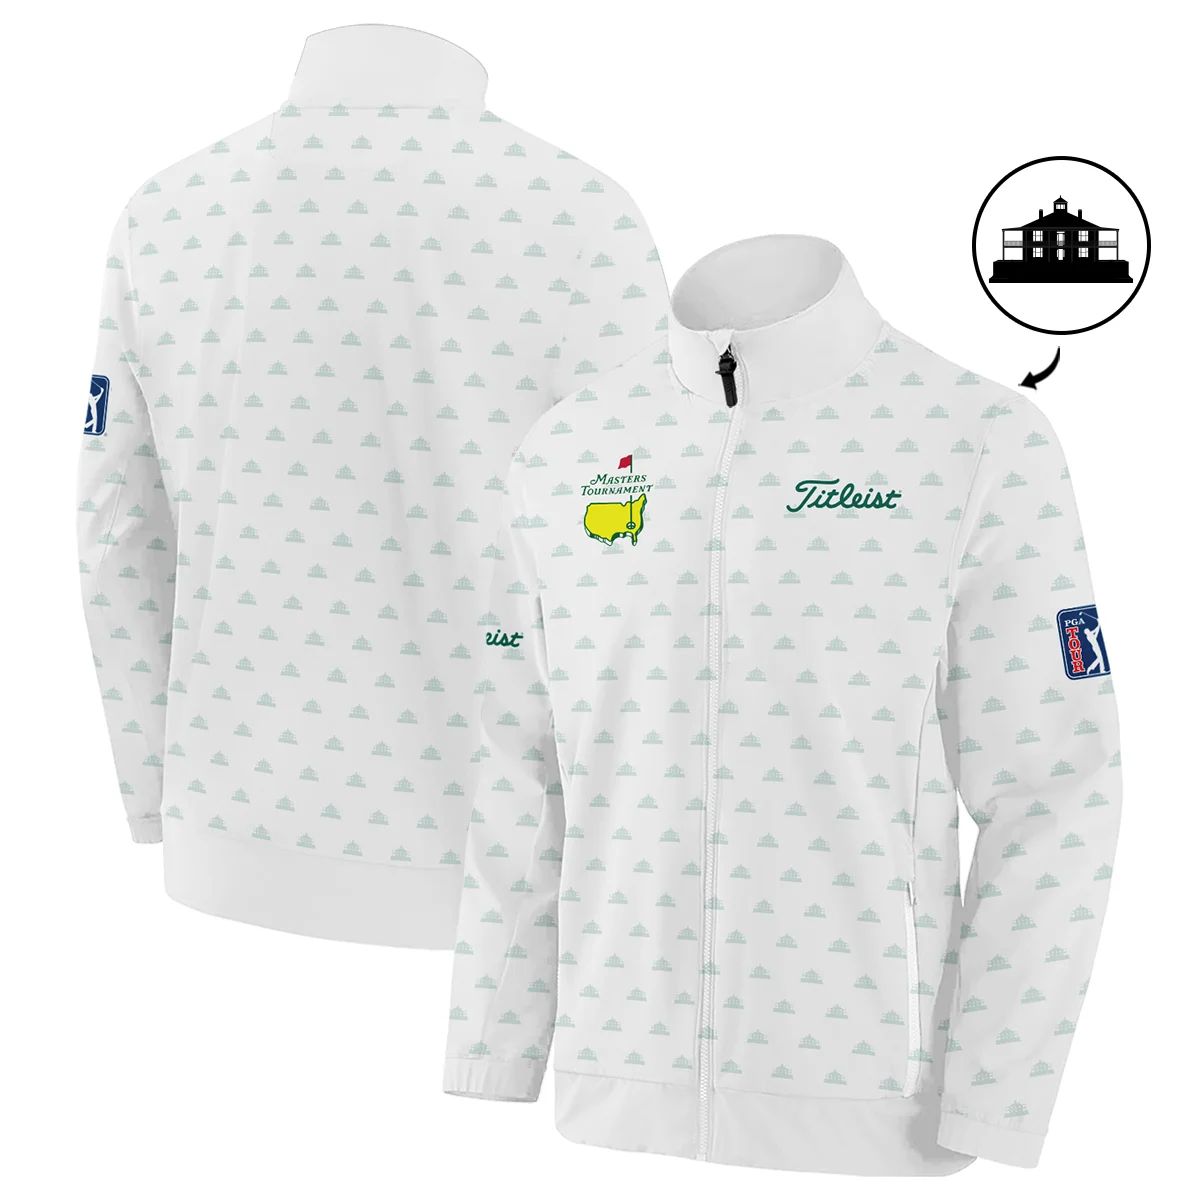 Masters Tournament Golf Sport Titleist Stand Colar Jacket Sports Cup Pattern White Green Stand Colar Jacket